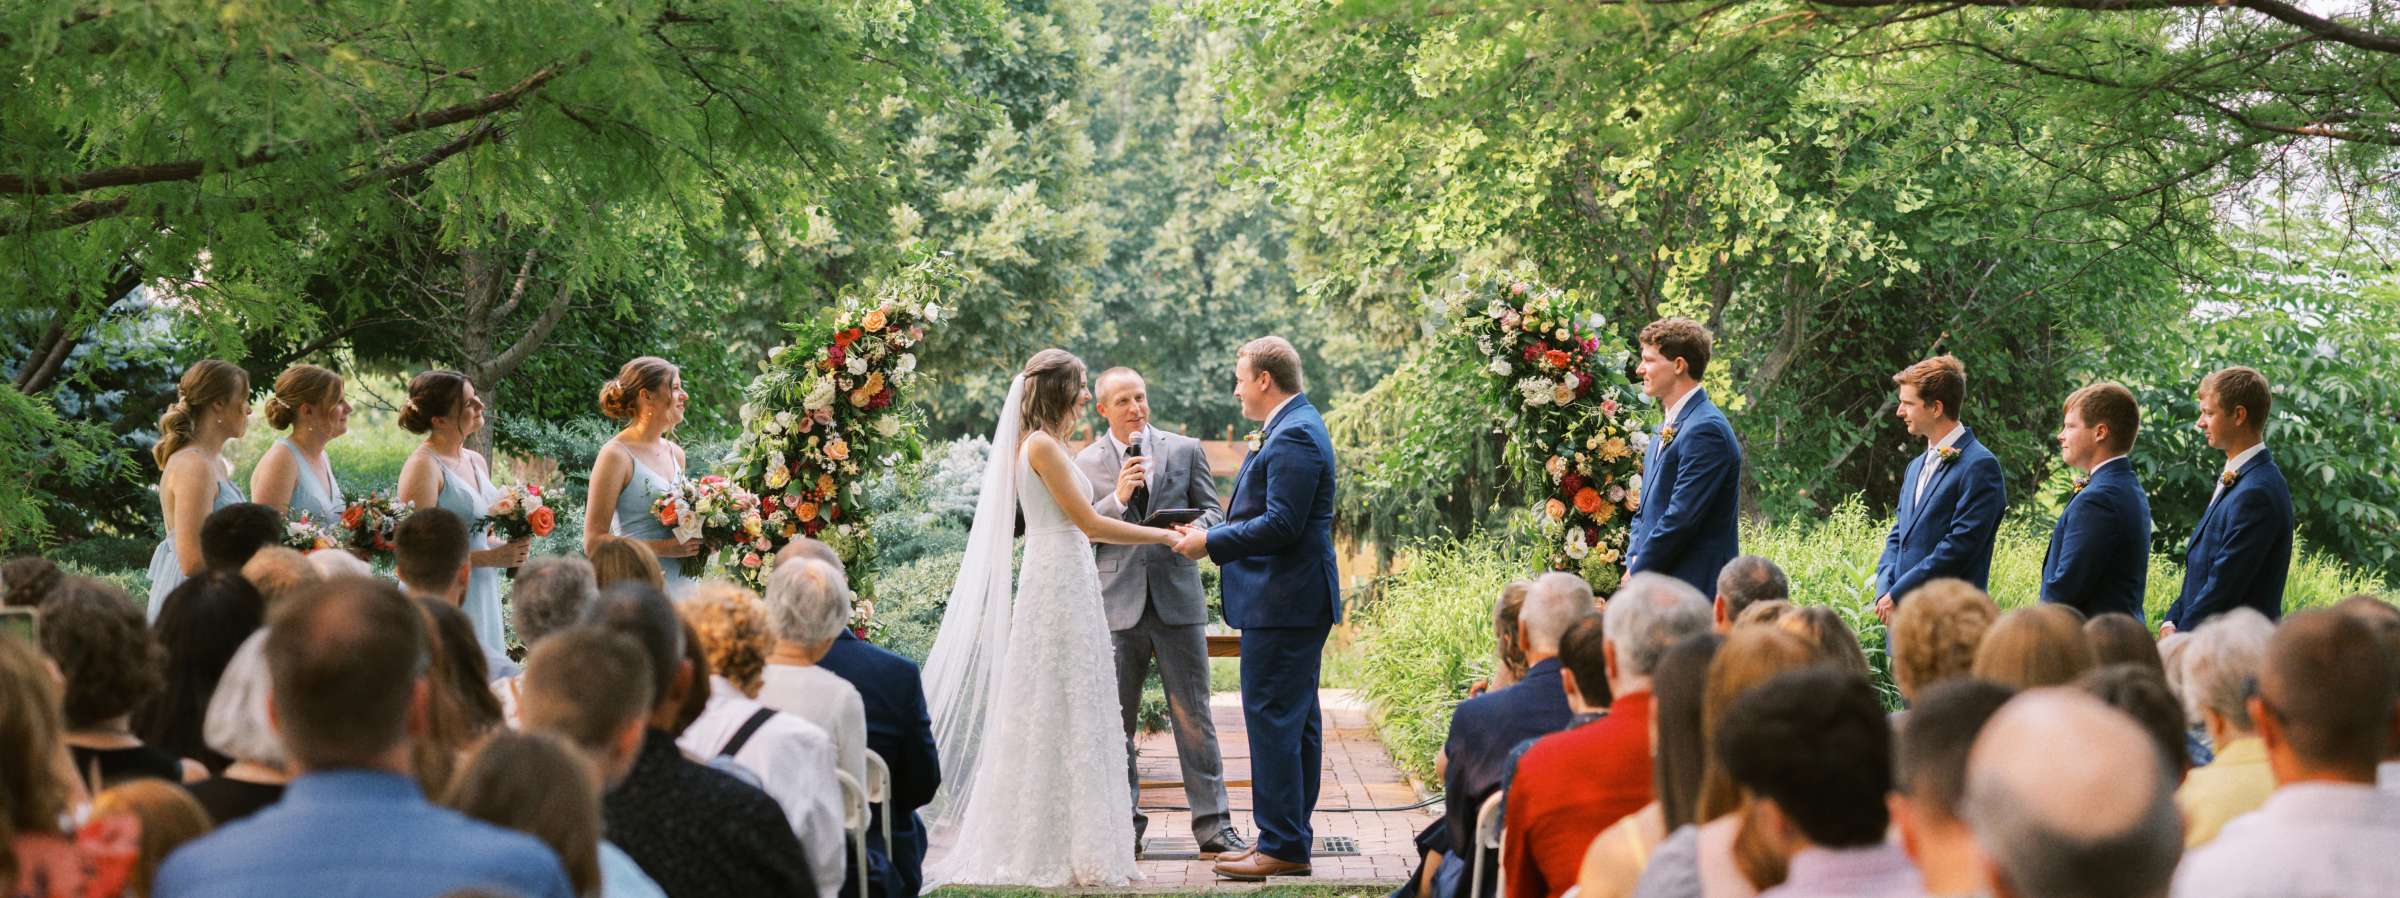 Wedding ceremony in beautiful garden surrounded by cypress trees